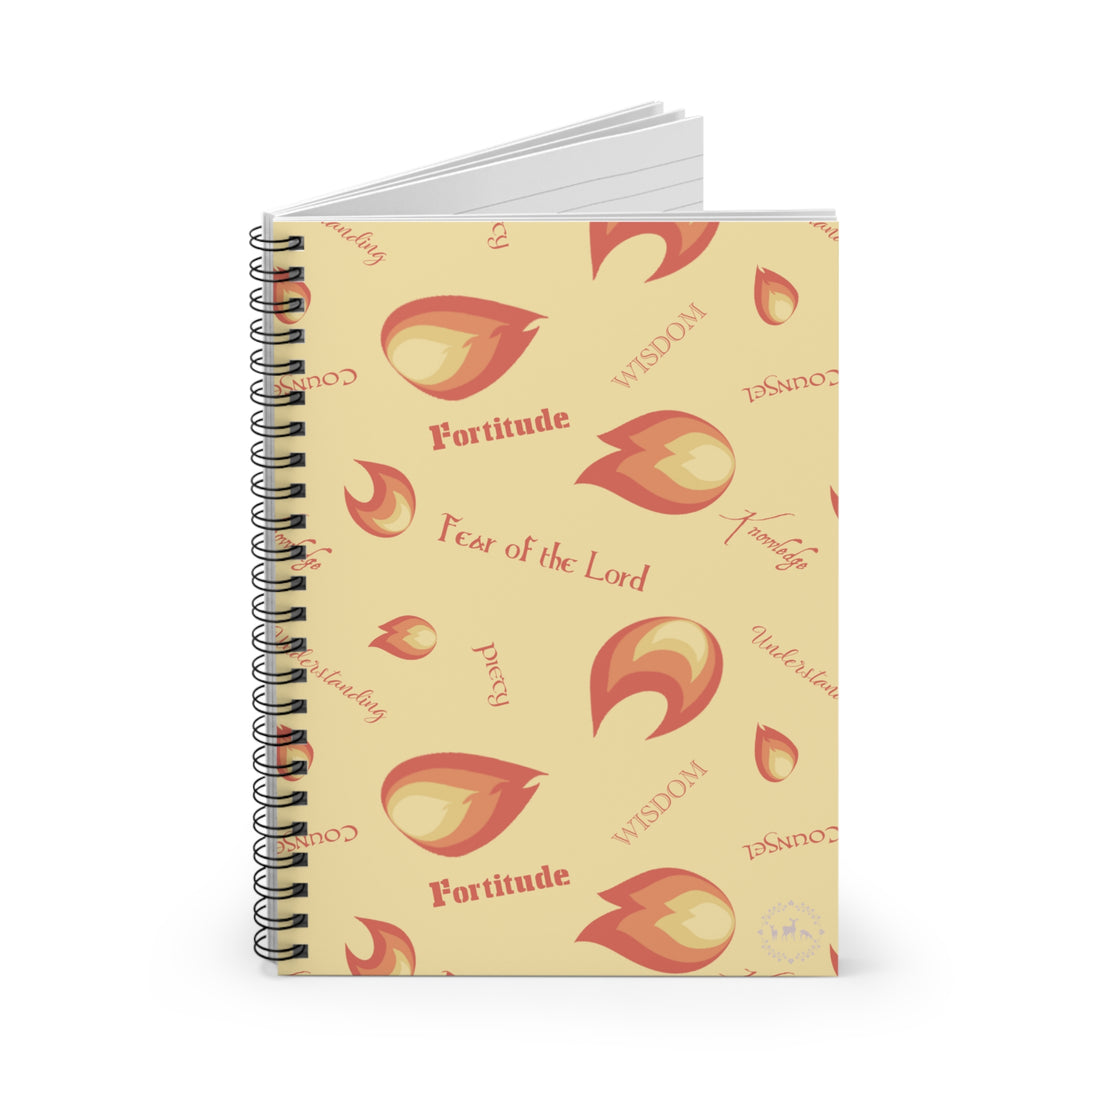 Gifts of the Holy Spirit Spiral Notebook - Ruled Line